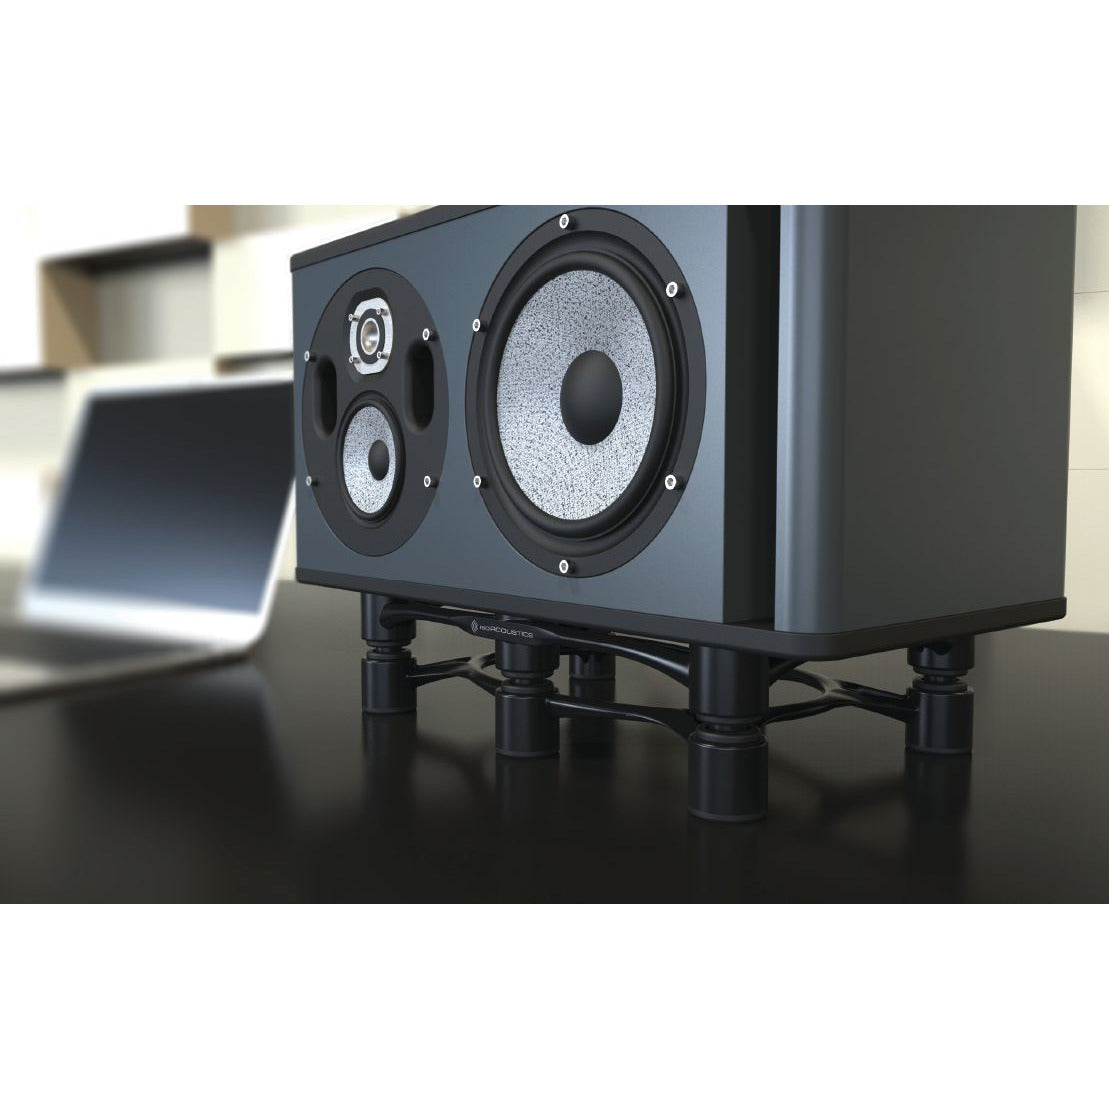 IsoAcoustics APERTA 300 Isolation Stand Each